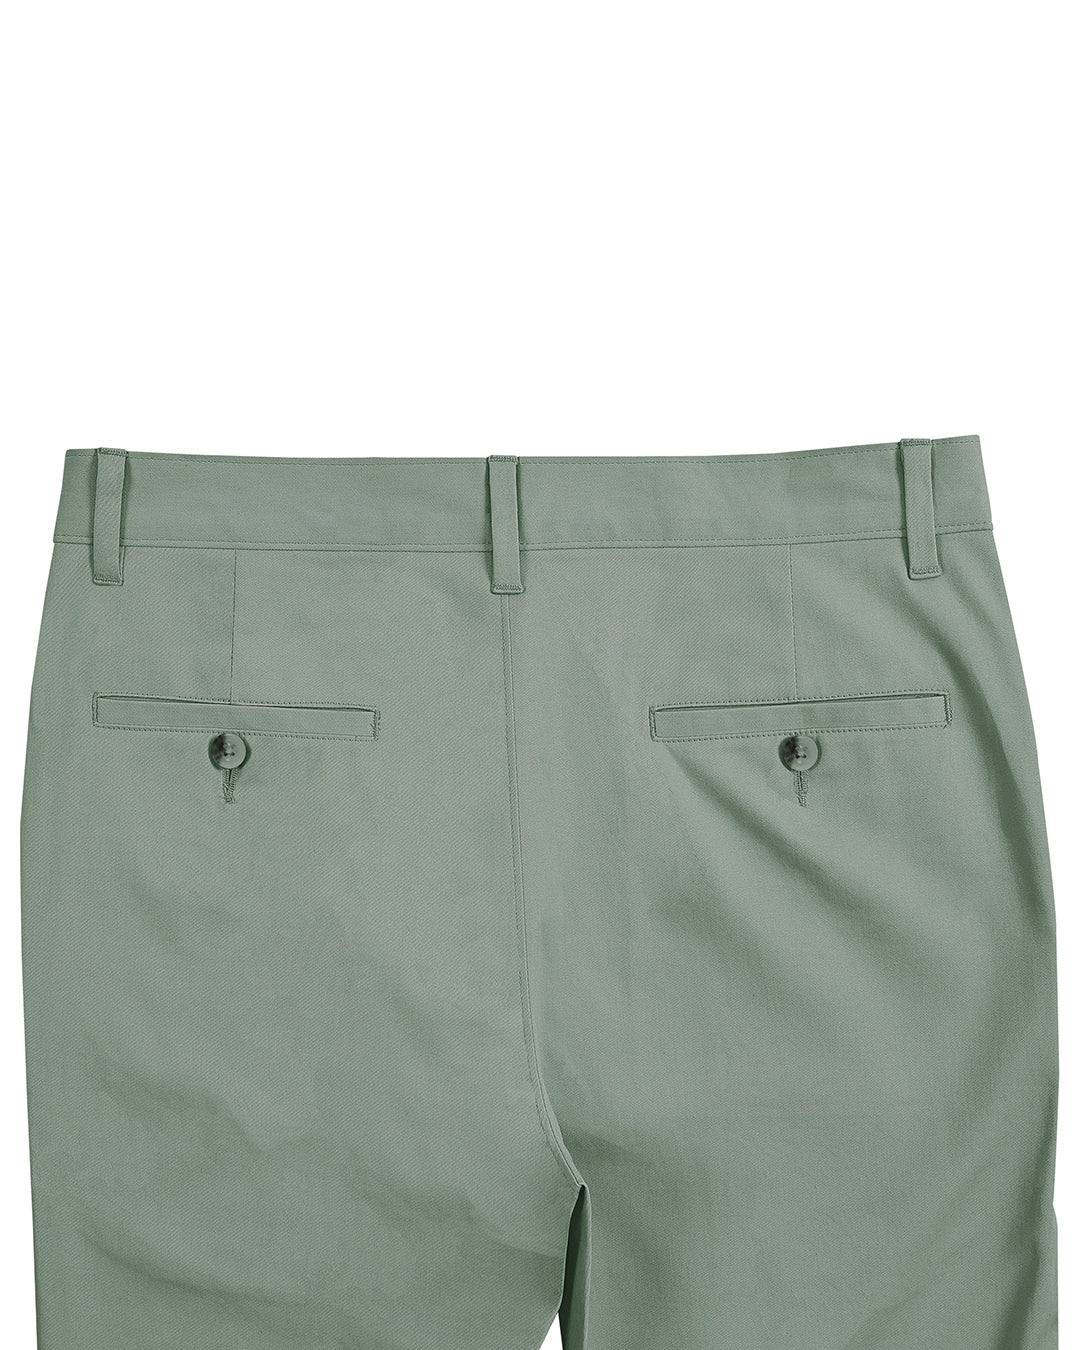 Back view of custom Genoa Chino pants for men by Luxire in pistachio green